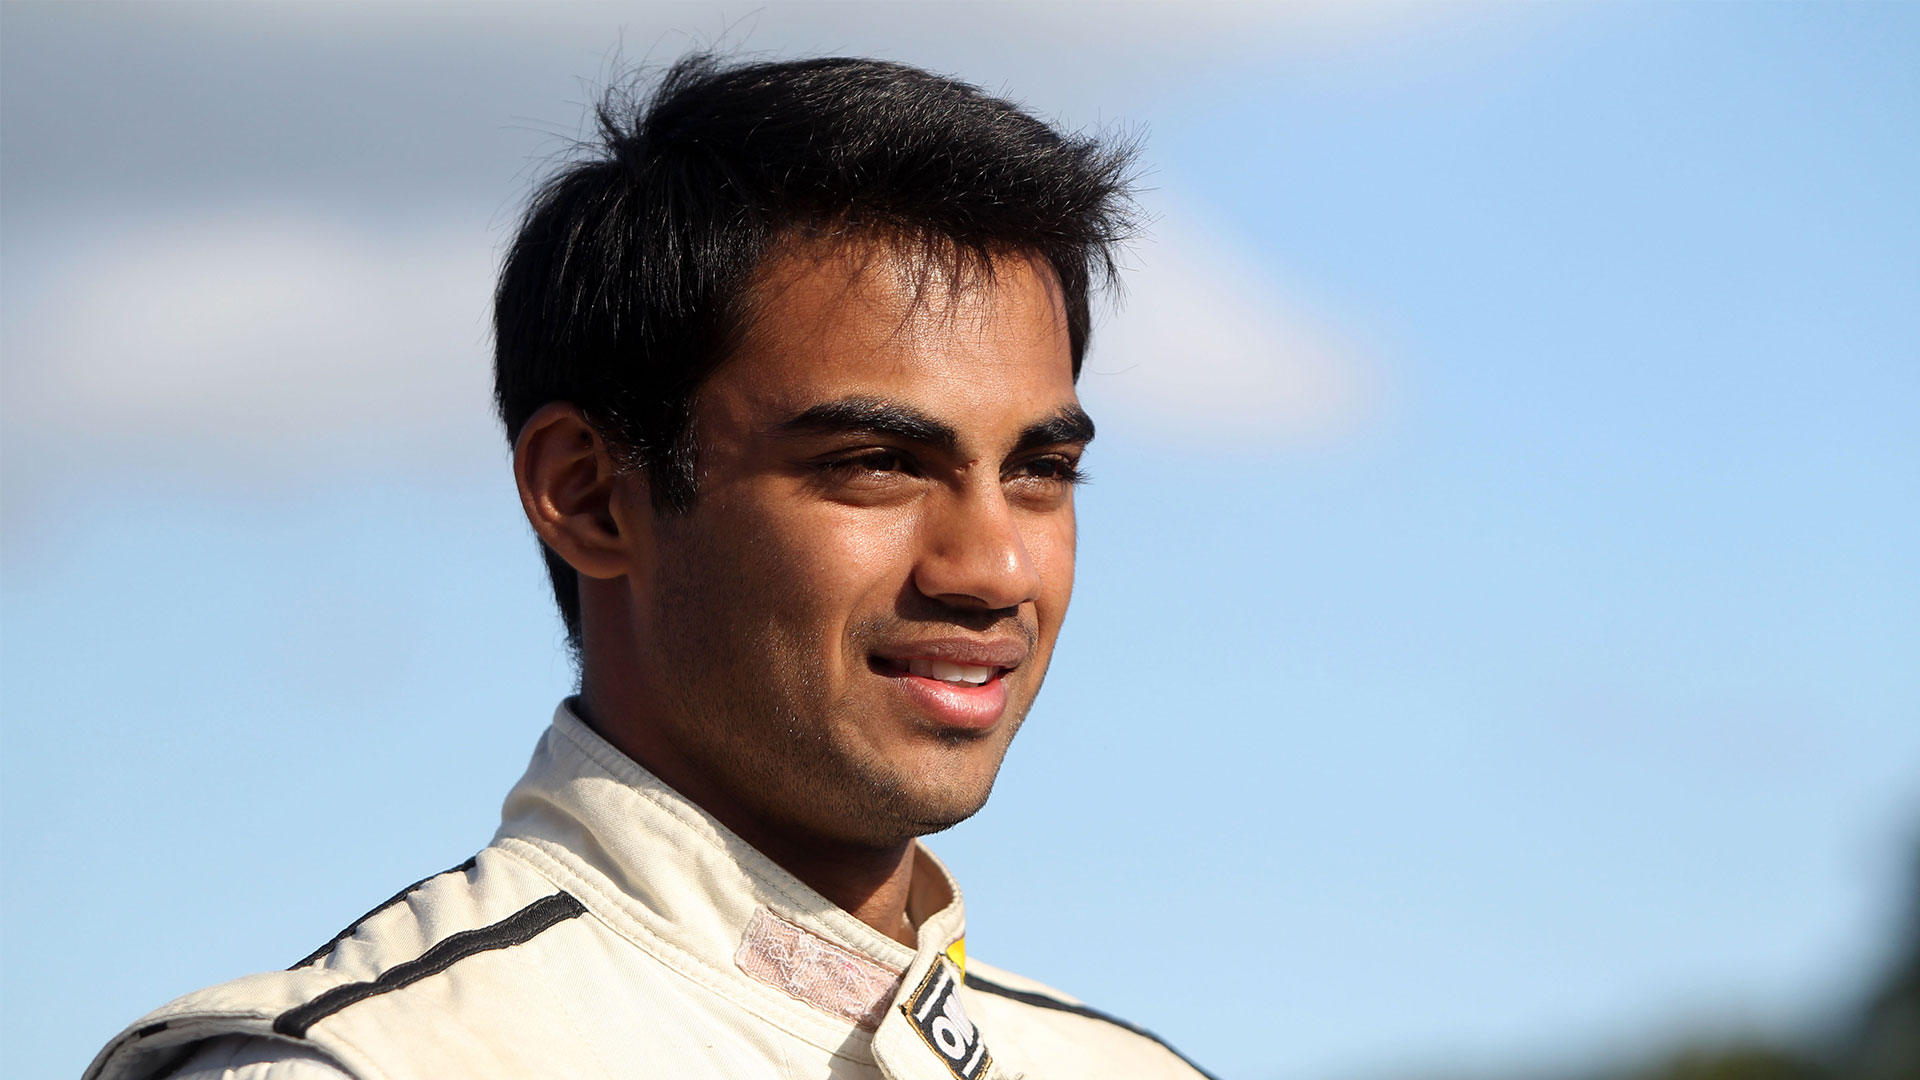 Mixed weekend for Rabindra in France